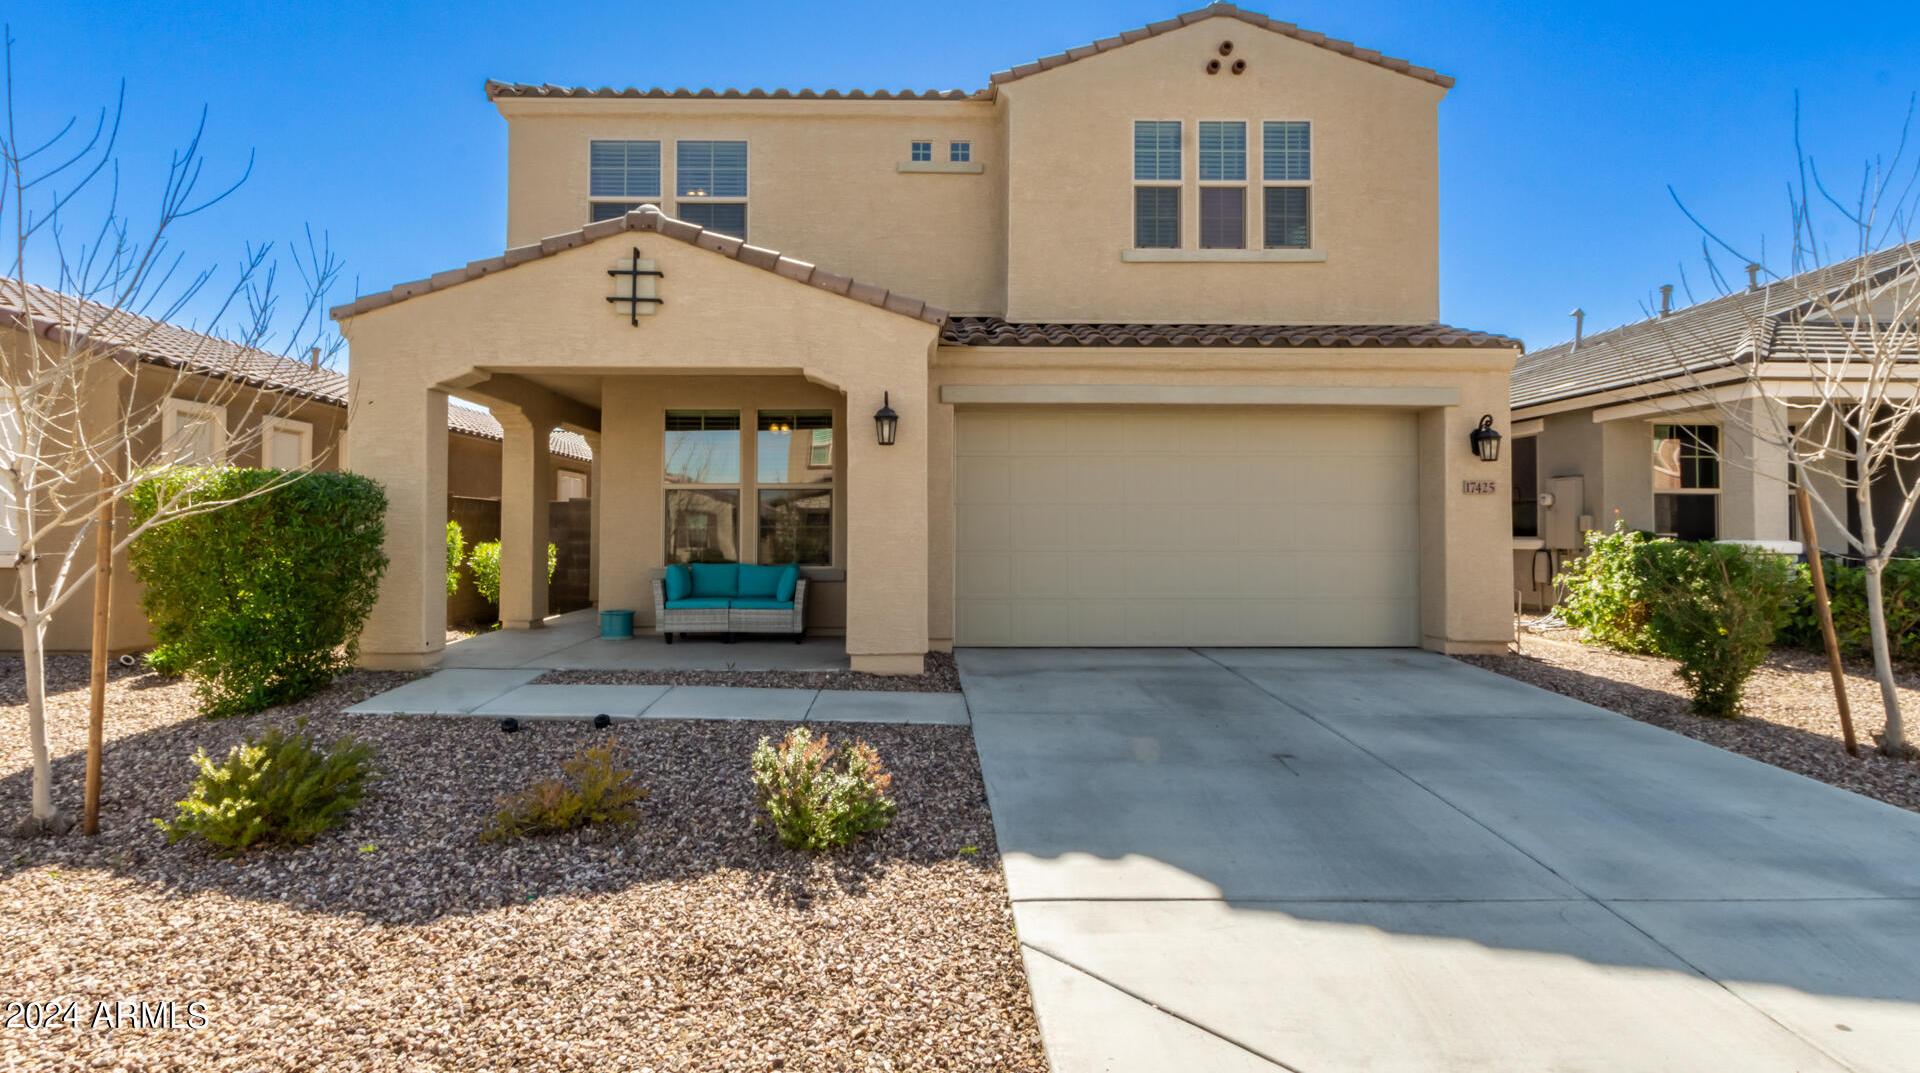 Photo one of 17425 W Willow Ave Surprise AZ 85388 | MLS 6667158